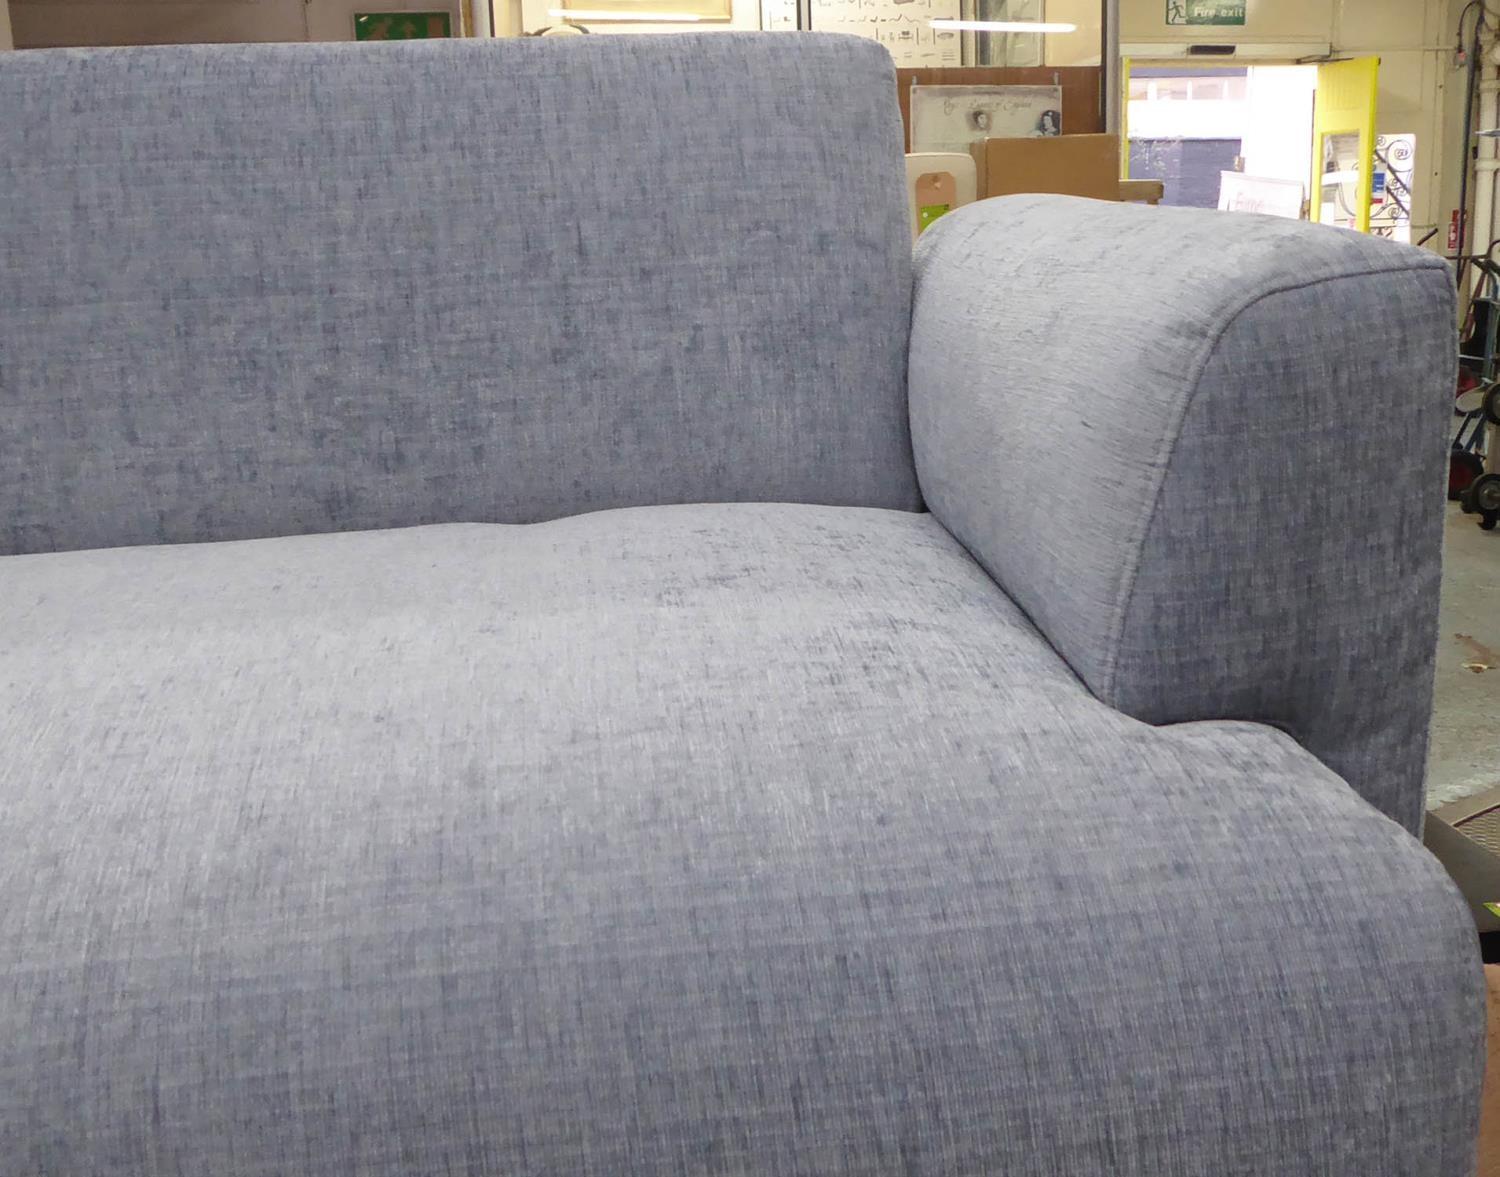 SOFA, contemporary blue fabric upholstered, ebonised feet, 145cm W approx. - Image 2 of 2